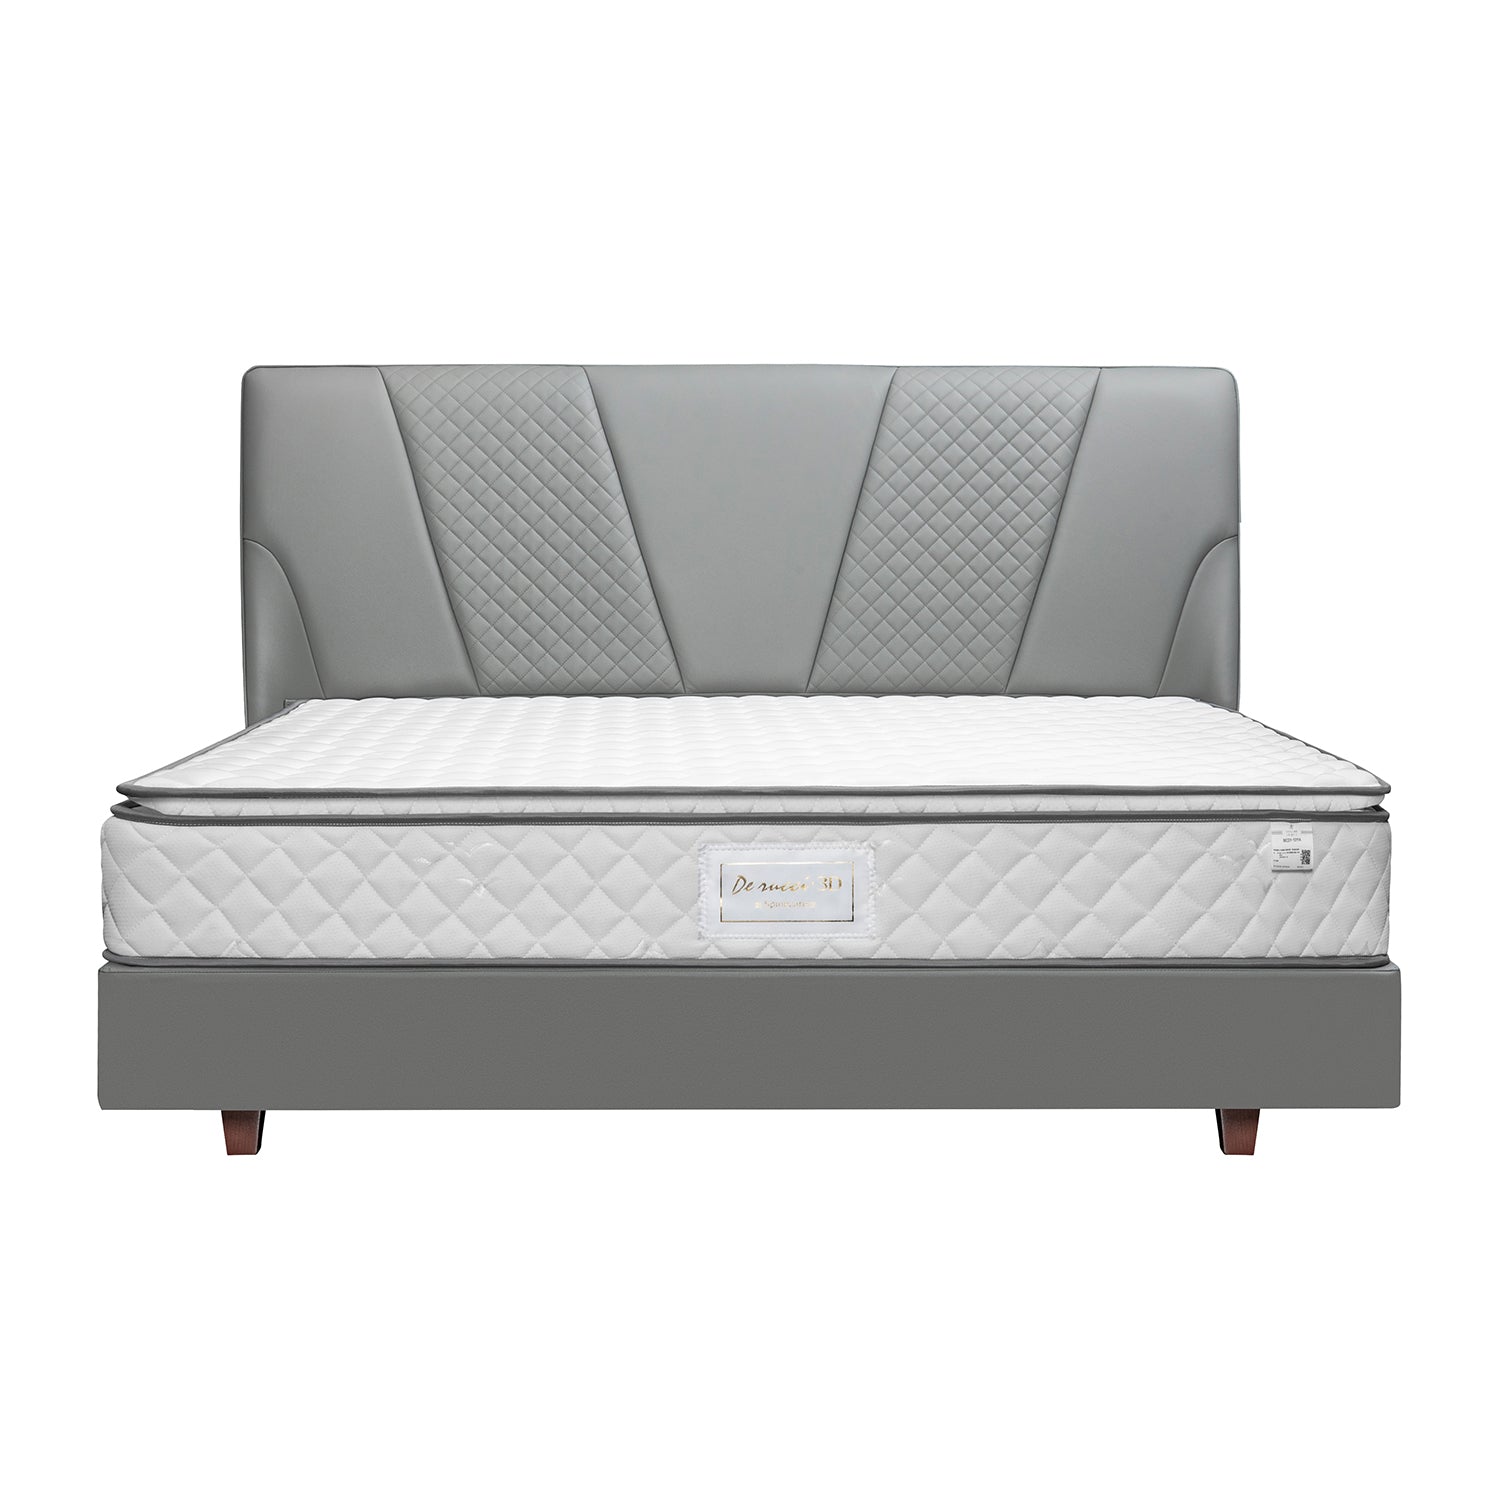 DeRUCCI Bed Frame BOC1 - 005 with quilted gray upholstered headboard and white mattress, modern design